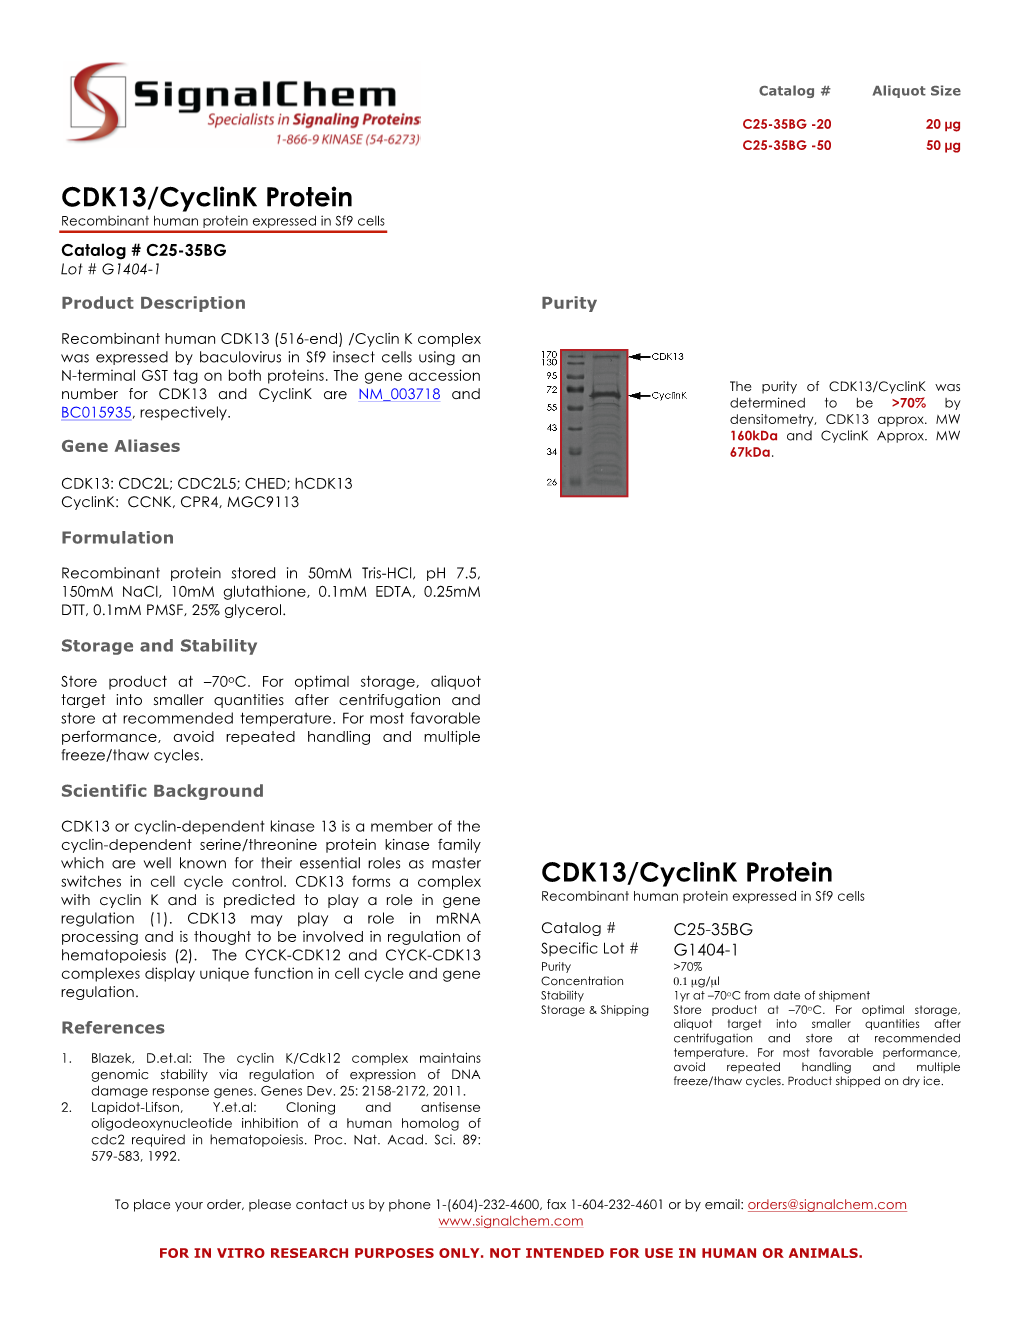 CDK13/Cyclink Protein Recombinant Human Protein Expressed in Sf9 Cells